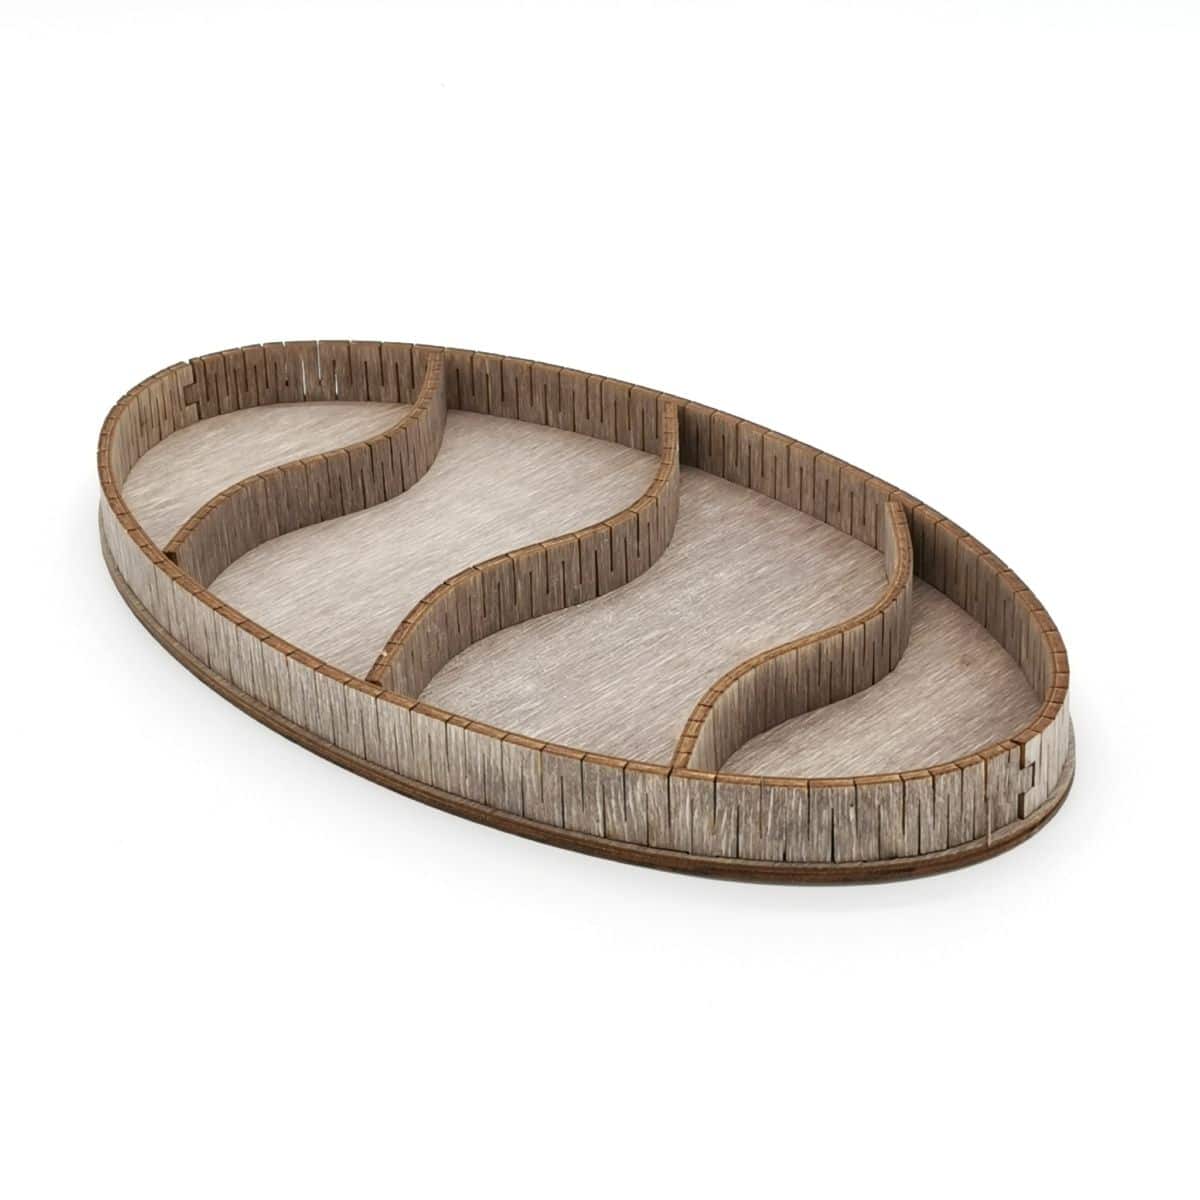 Oval Shaped Wooden Serving Platter with Compartments Laser Cut File